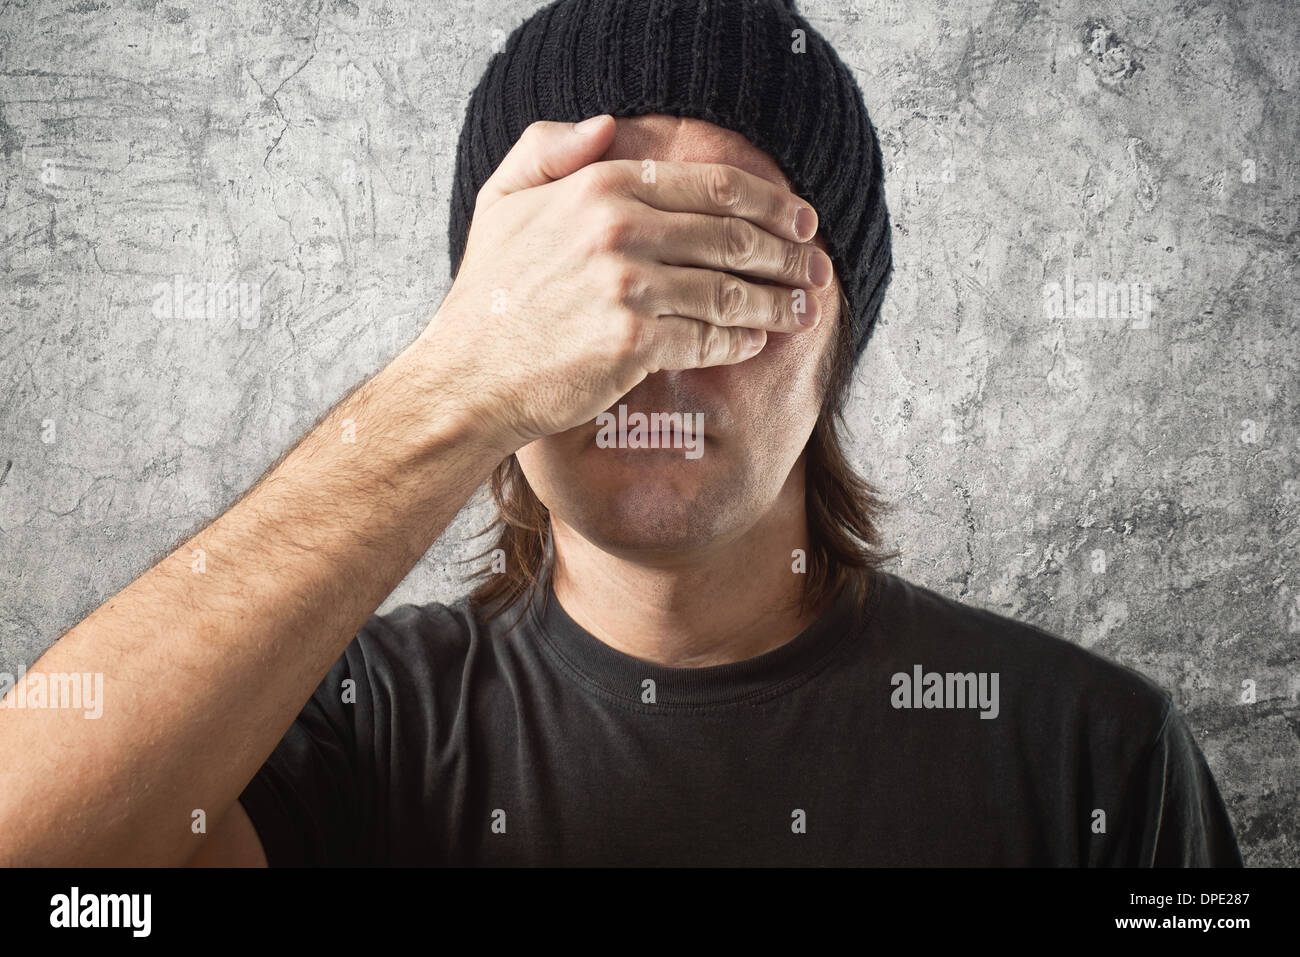 Portrait of Casual Man with Black Cap covering face in disbelief against grunge background Stock Photo